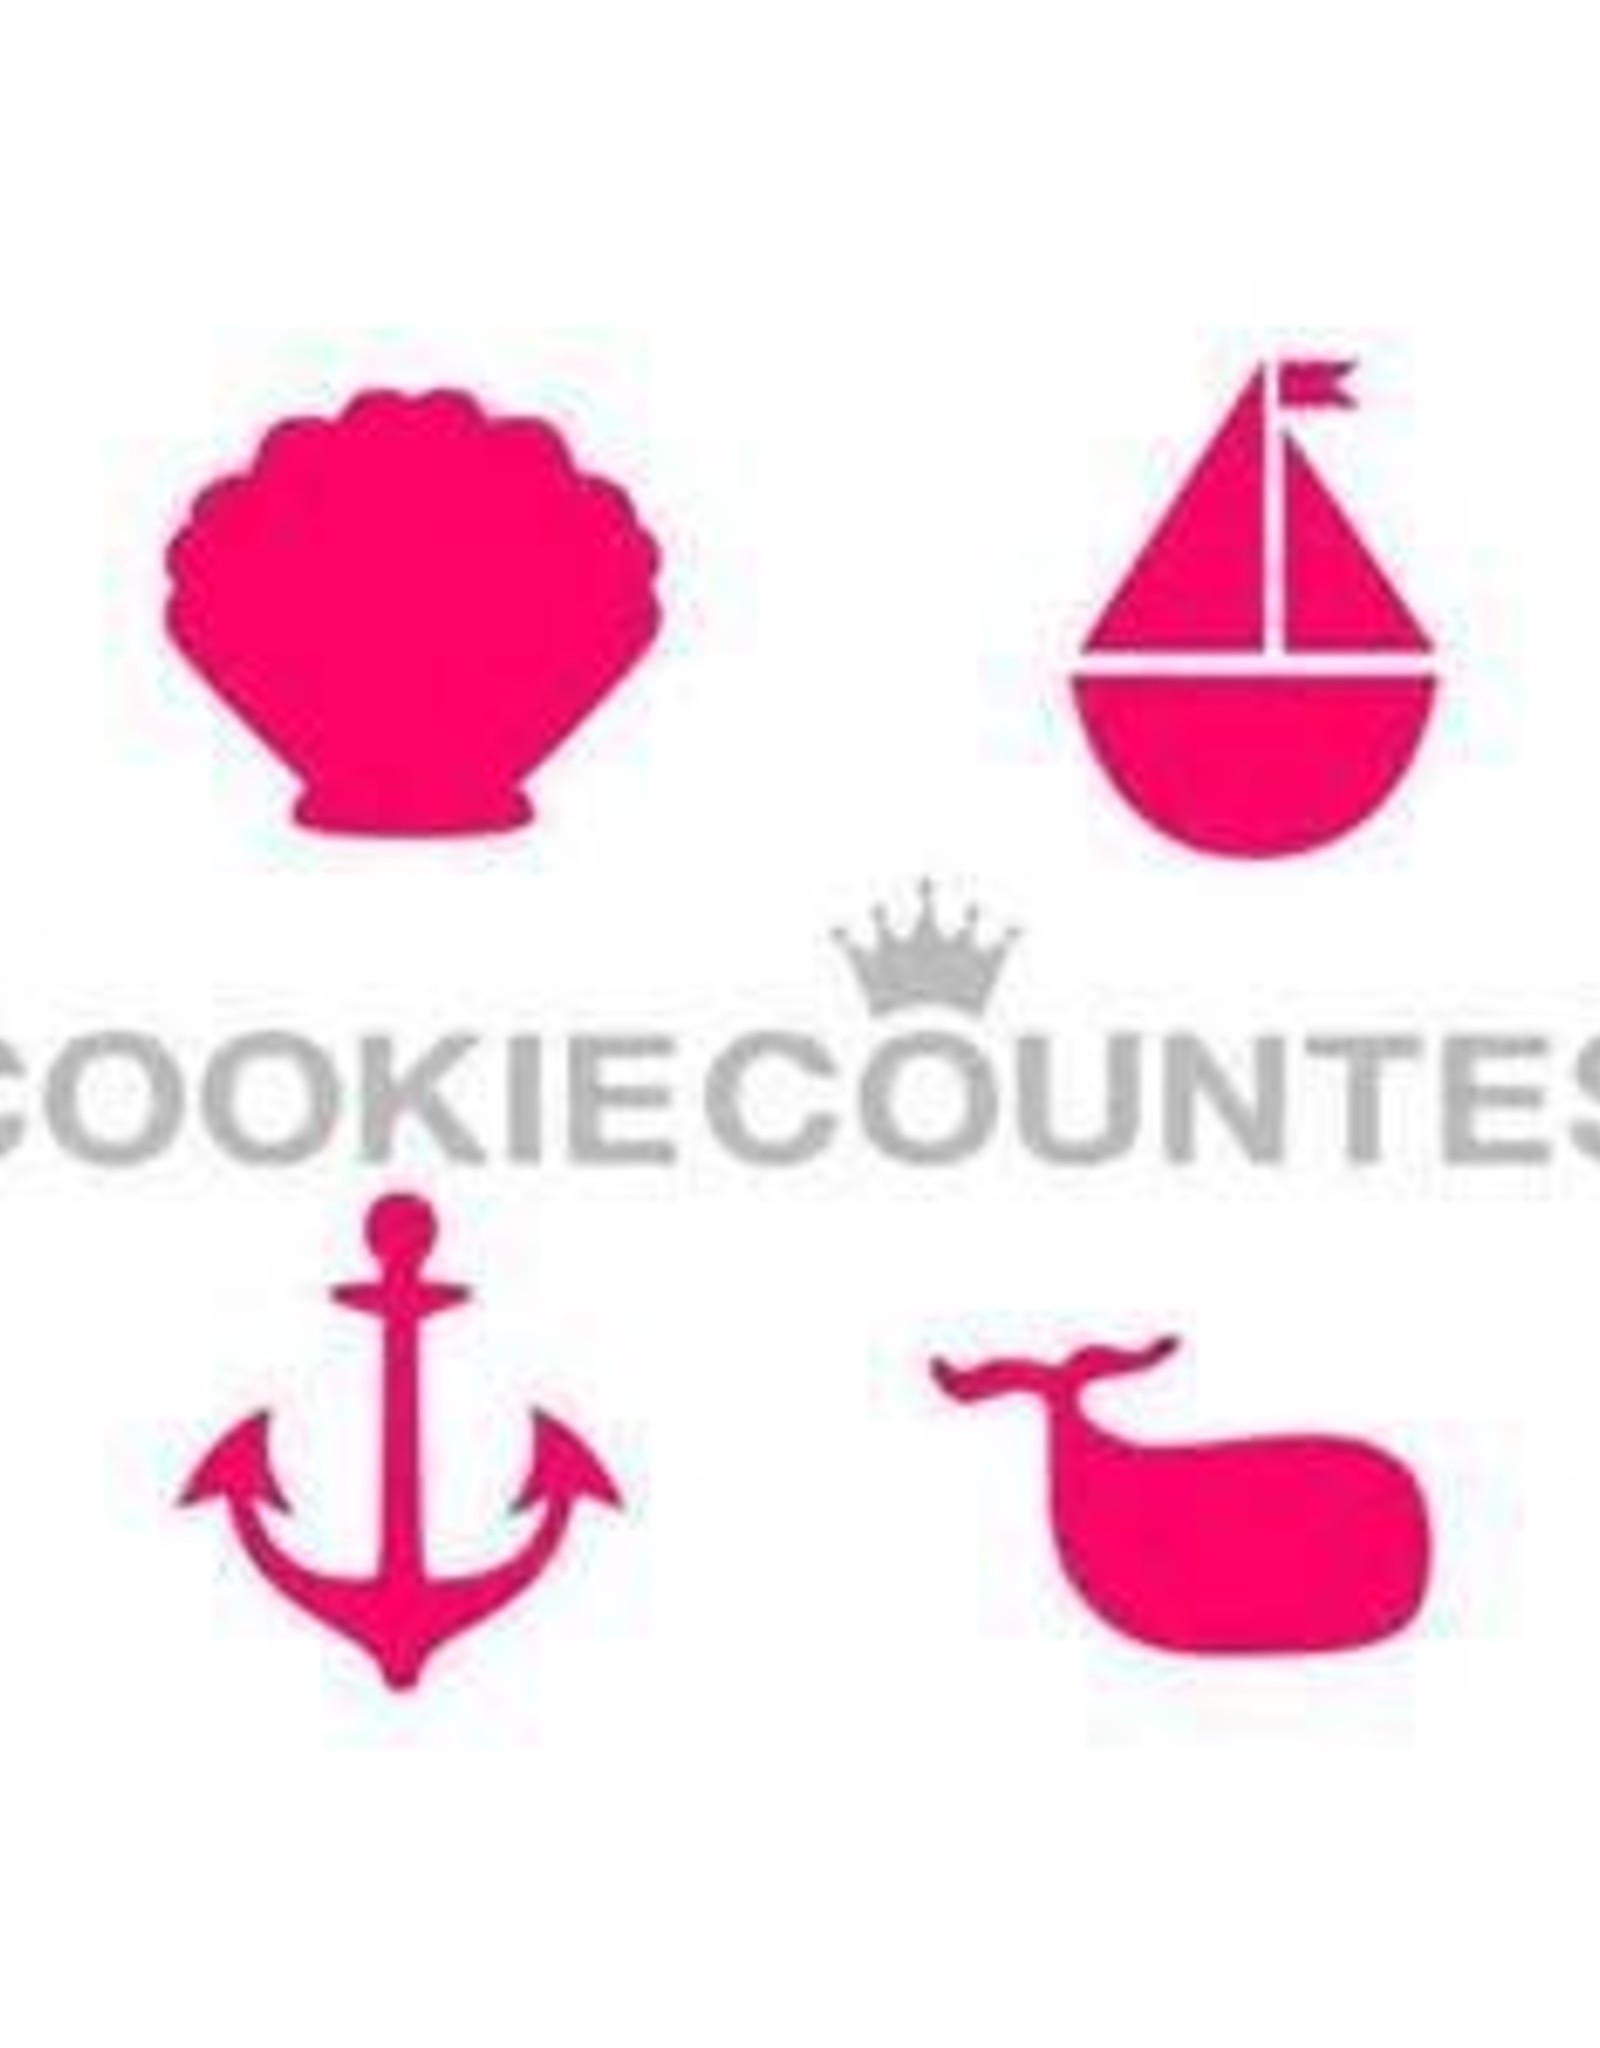 The Cookie Countess Stencil (Nautical 4-some)